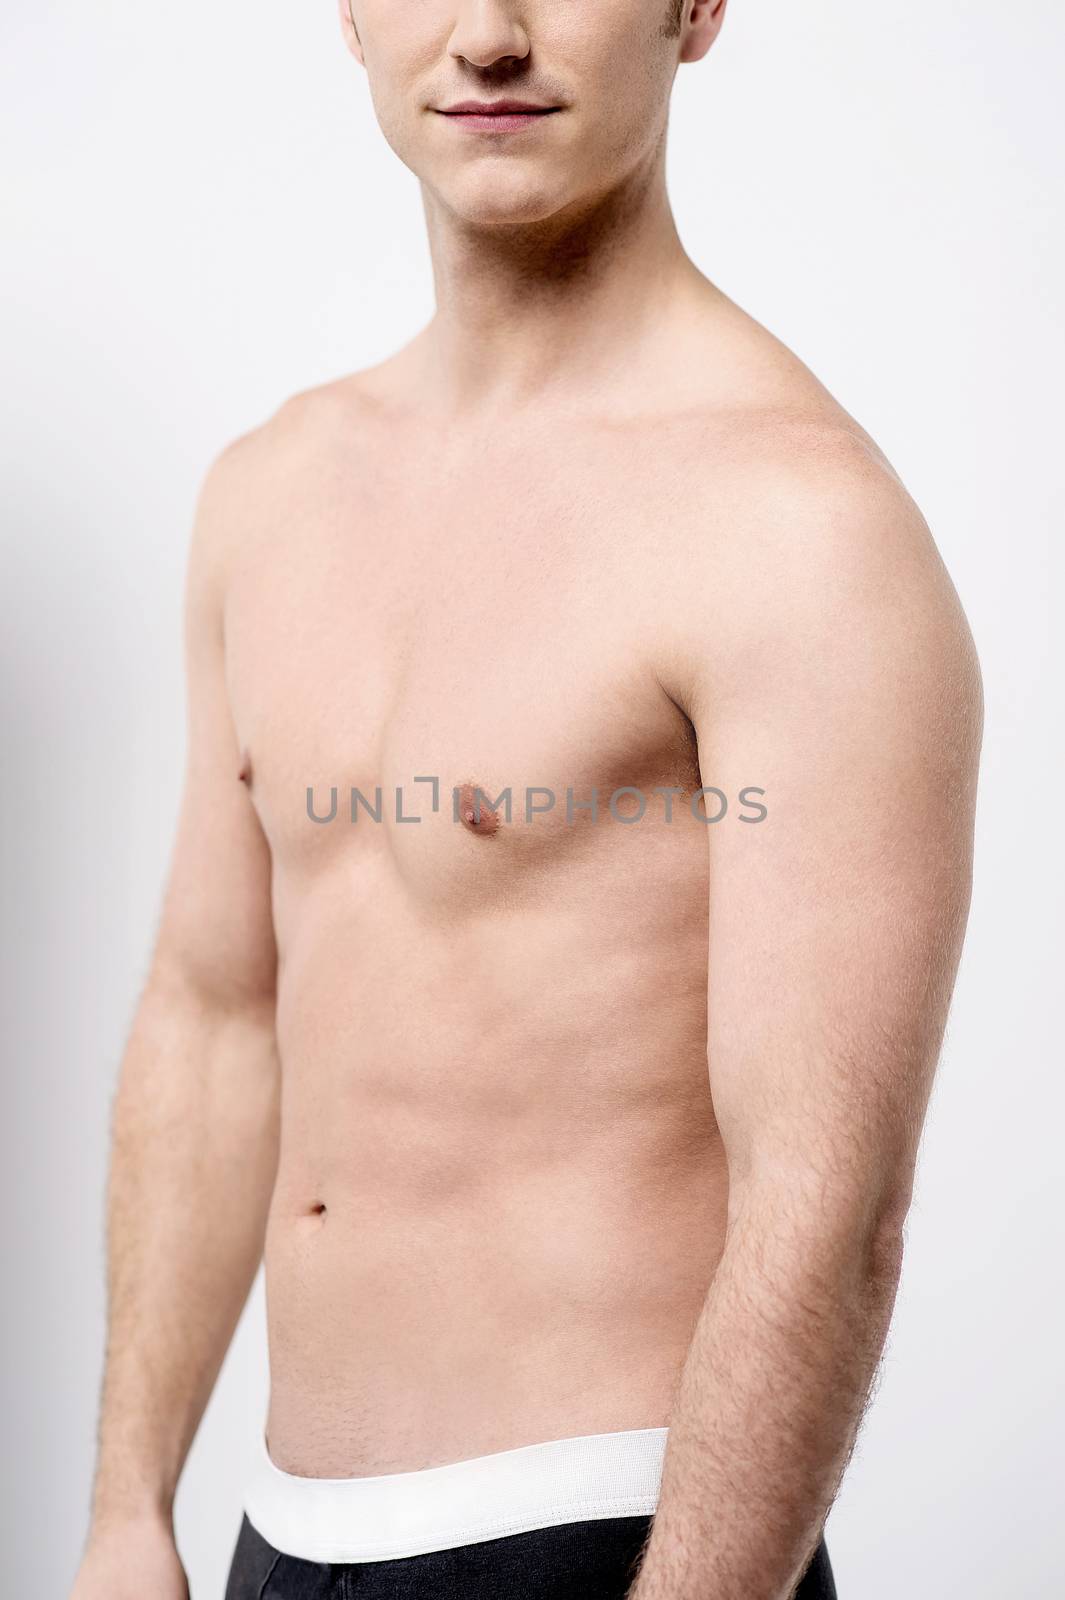 Cropped image of shirtless young male posing